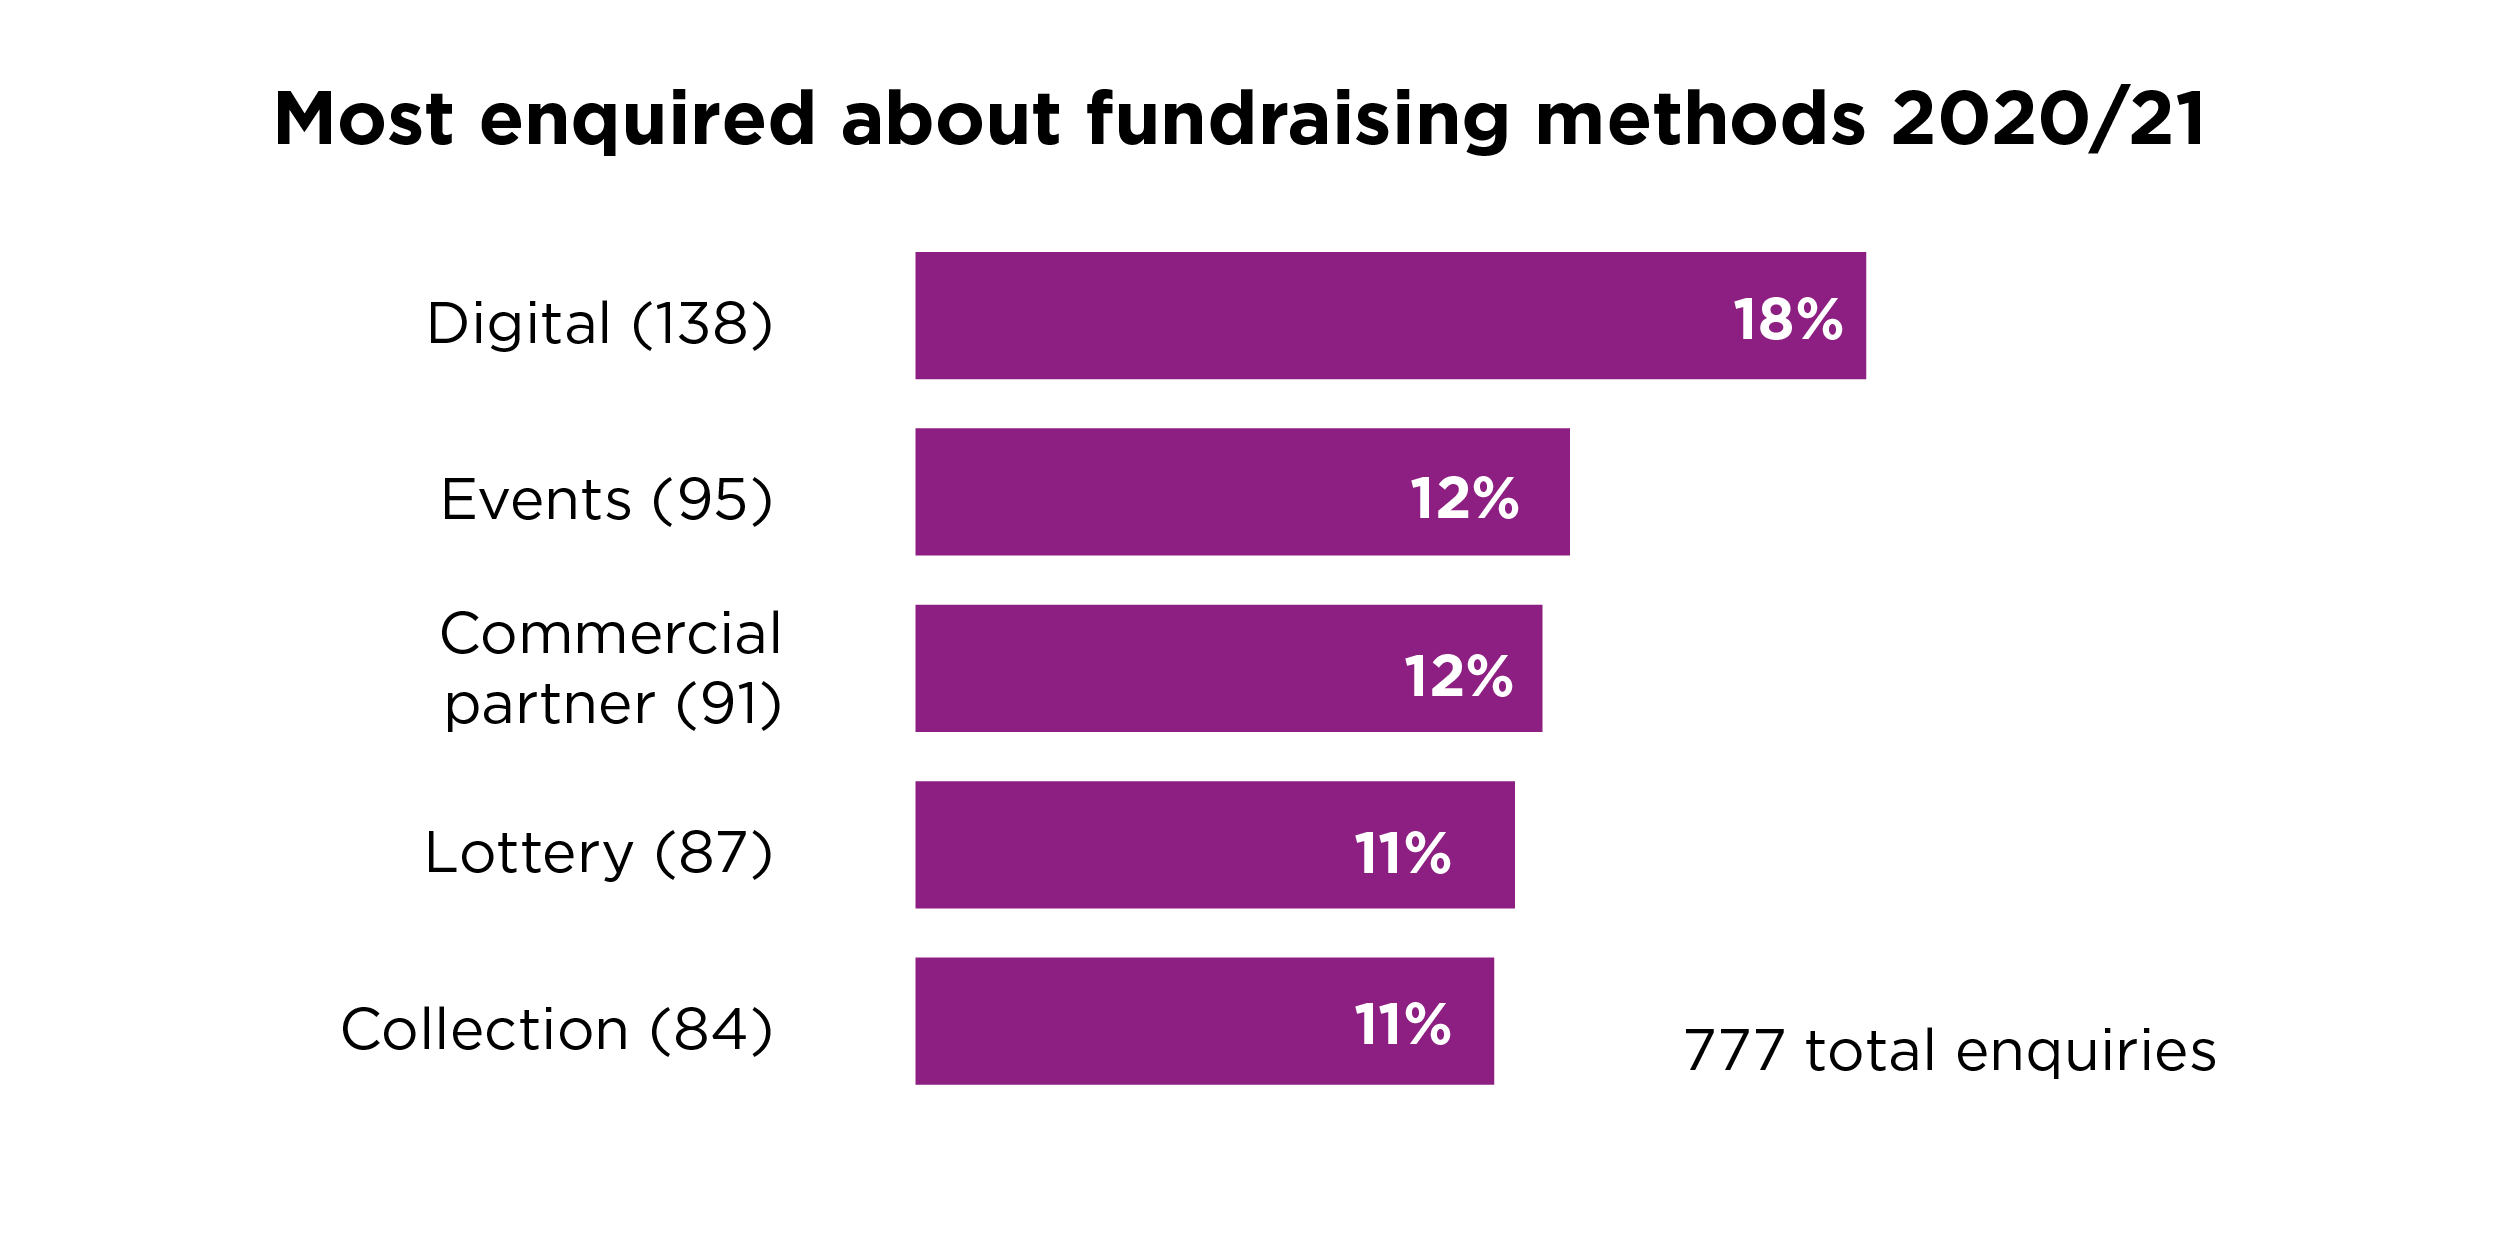 Graphic showing most enquired about fundraising methods 2020/21